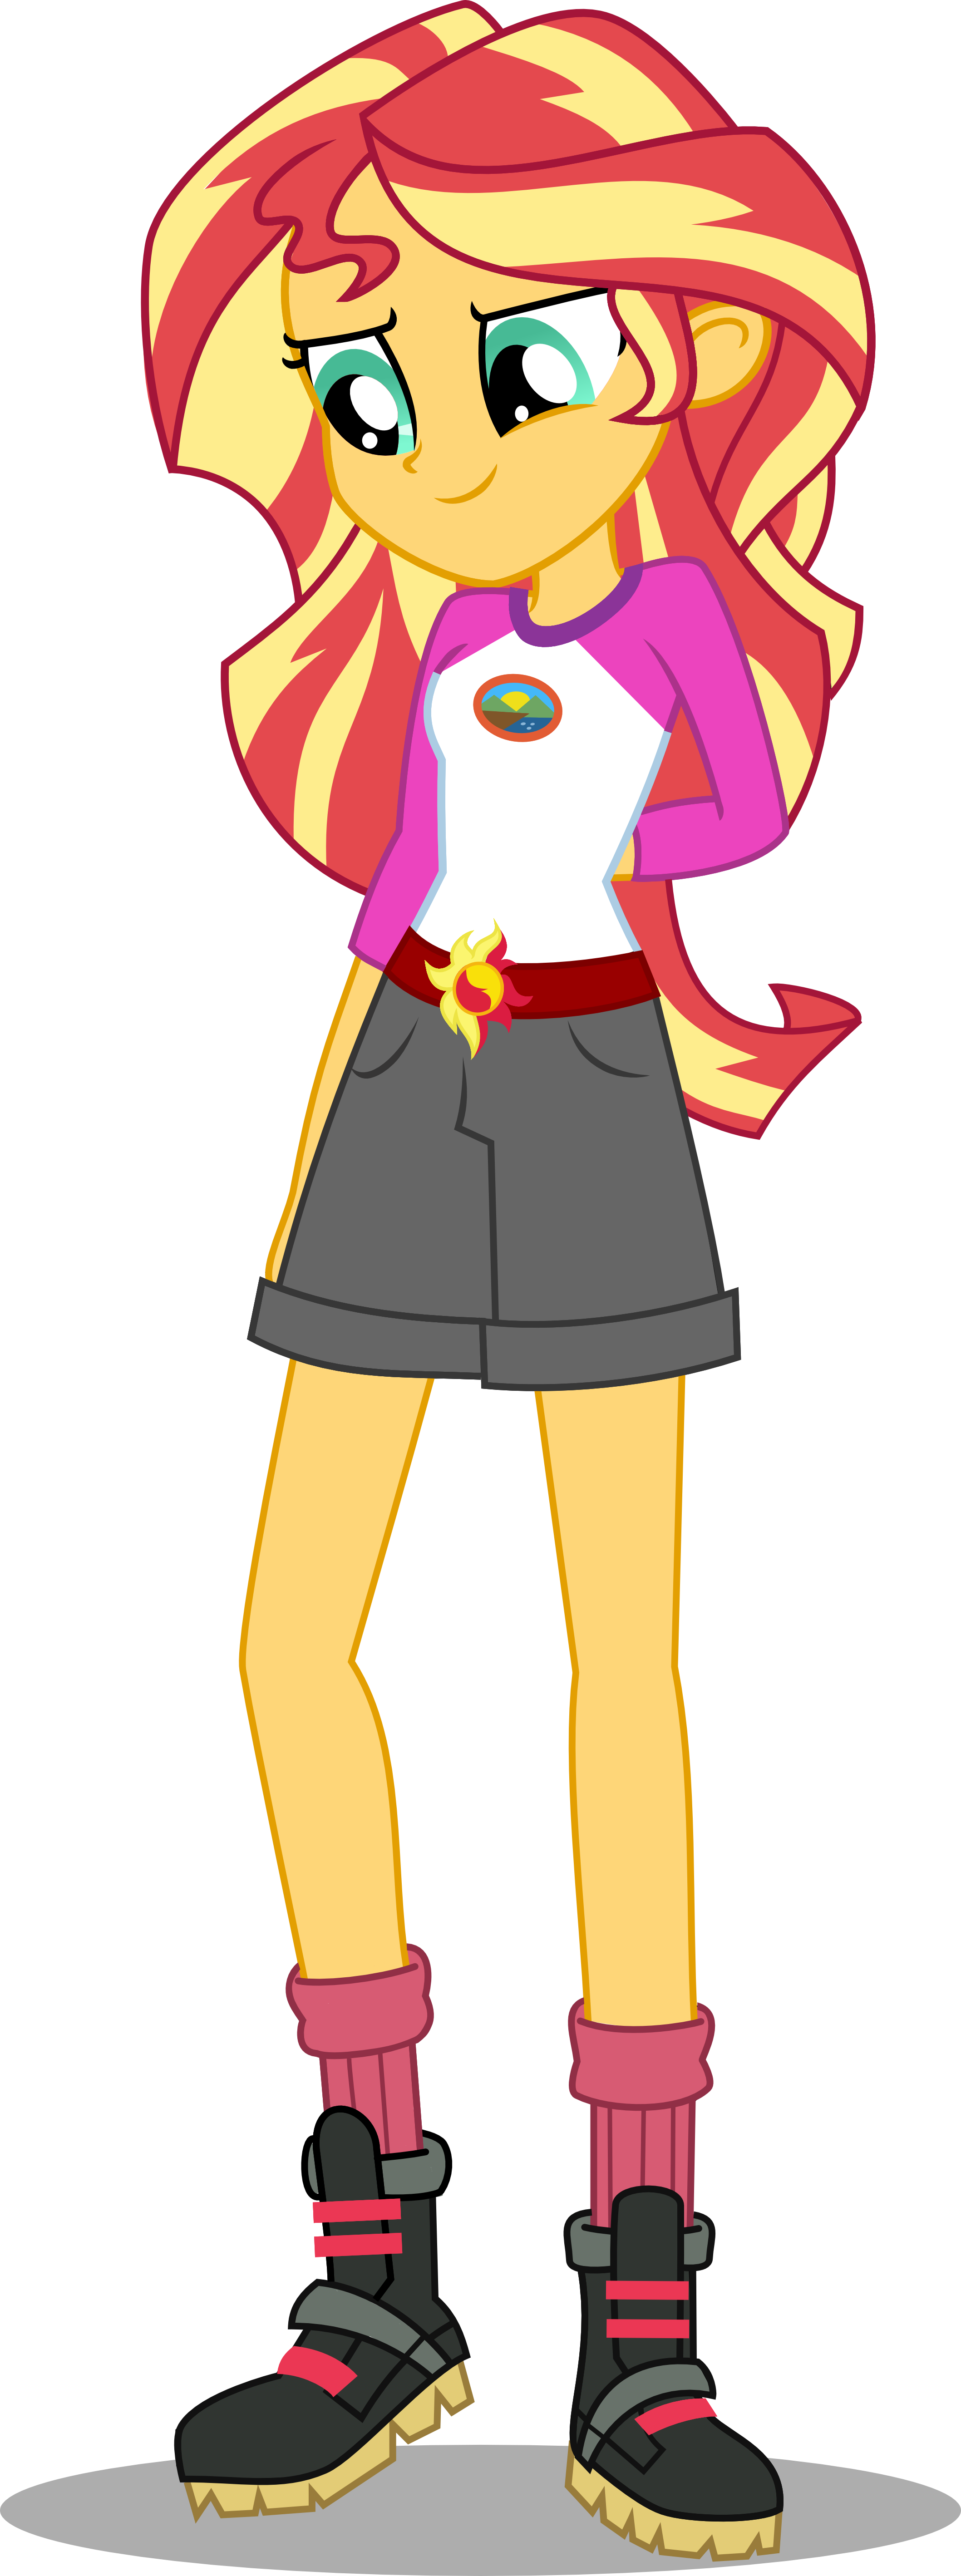 Sunset Shimmer By Anhel032015 - Equestria Girls 4 Legend Of Everfree (2117x5675)